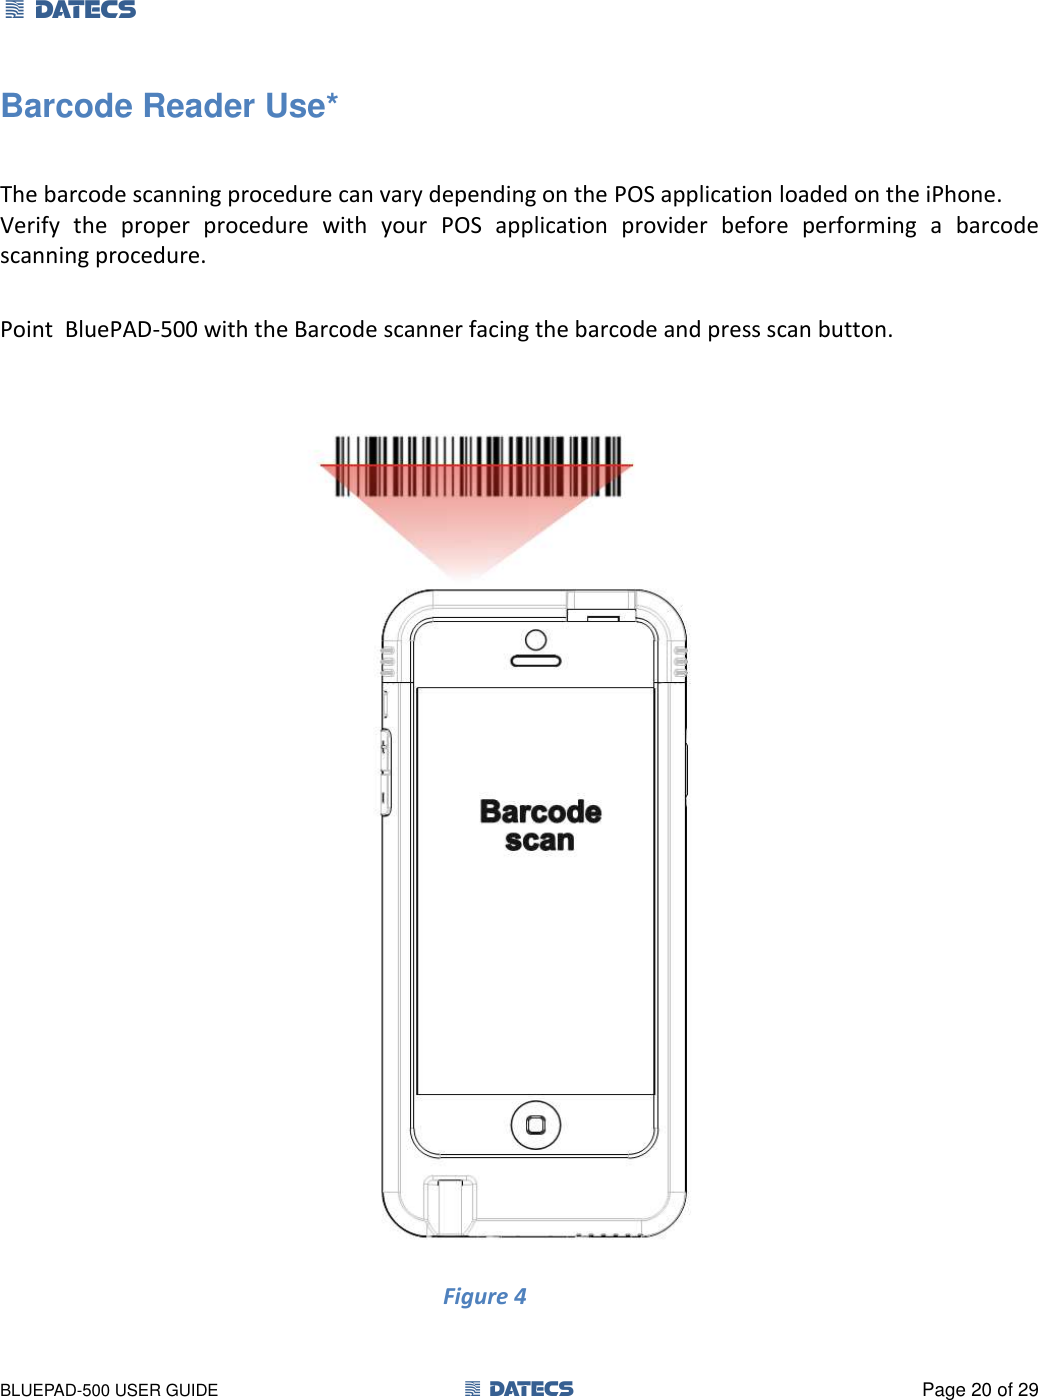 1 DATECS       BLUEPAD-500 USER GUIDE  1 DATECS  Page 20 of 29 Barcode Reader Use*  The barcode scanning procedure can vary depending on the POS application loaded on the iPhone. Verify  the  proper  procedure  with  your  POS  application  provider  before  performing  a  barcode scanning procedure.  Point  BluePAD-500 with the Barcode scanner facing the barcode and press scan button.   Figure 4                                 